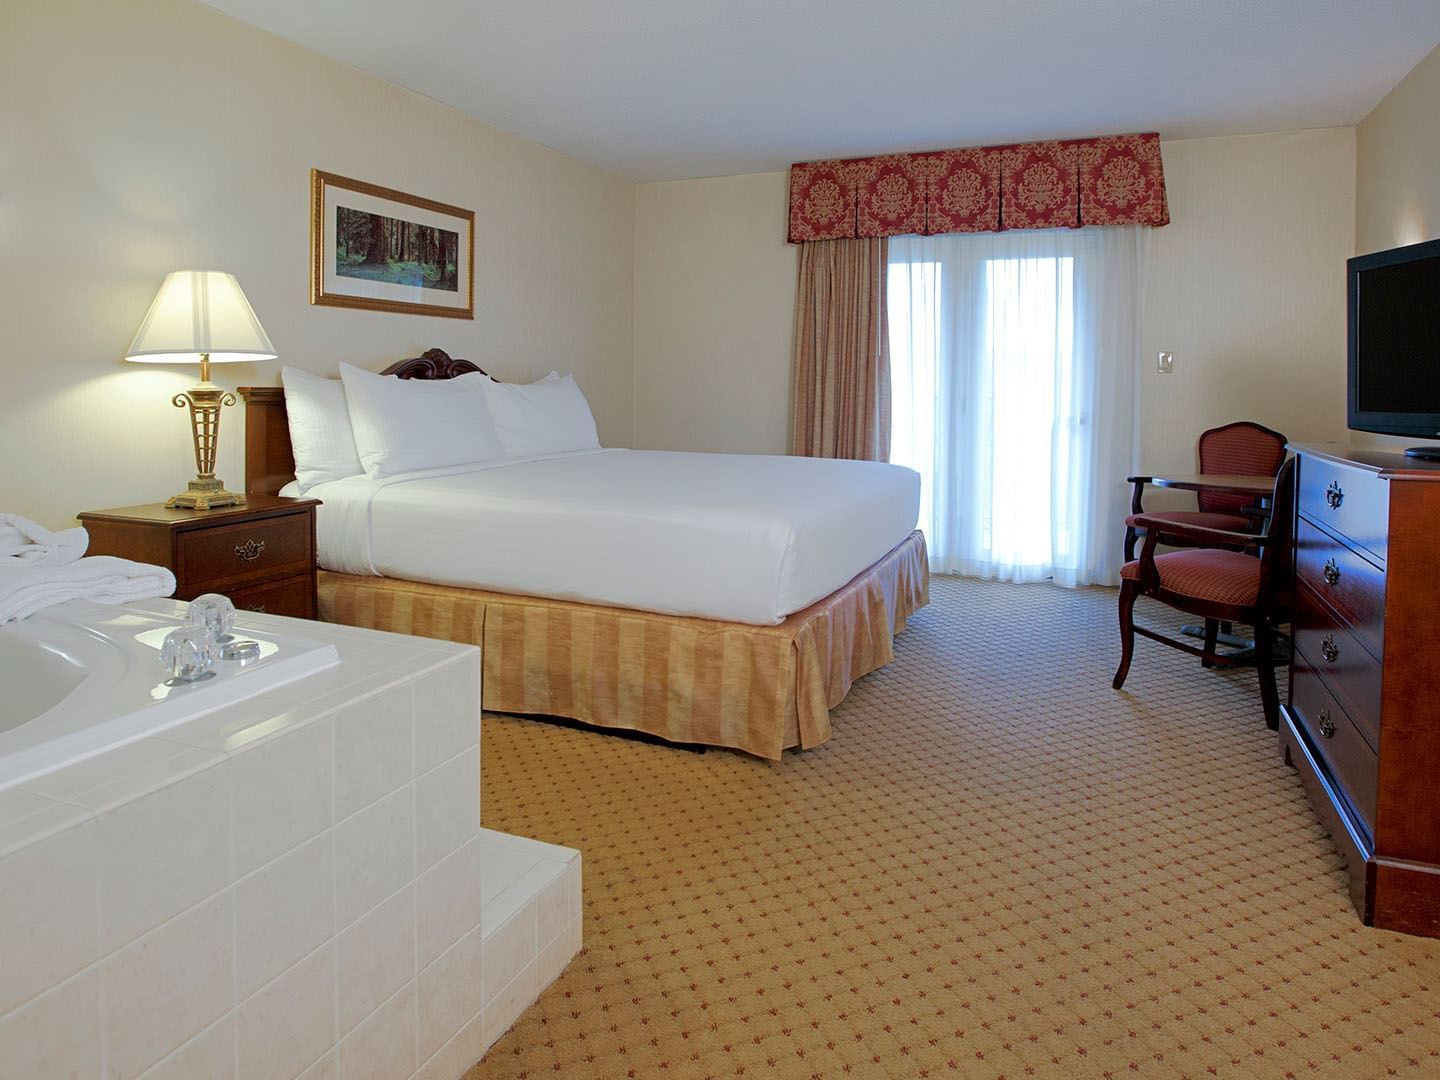 Superior King Room with a jacuzzi at Music Road Resort